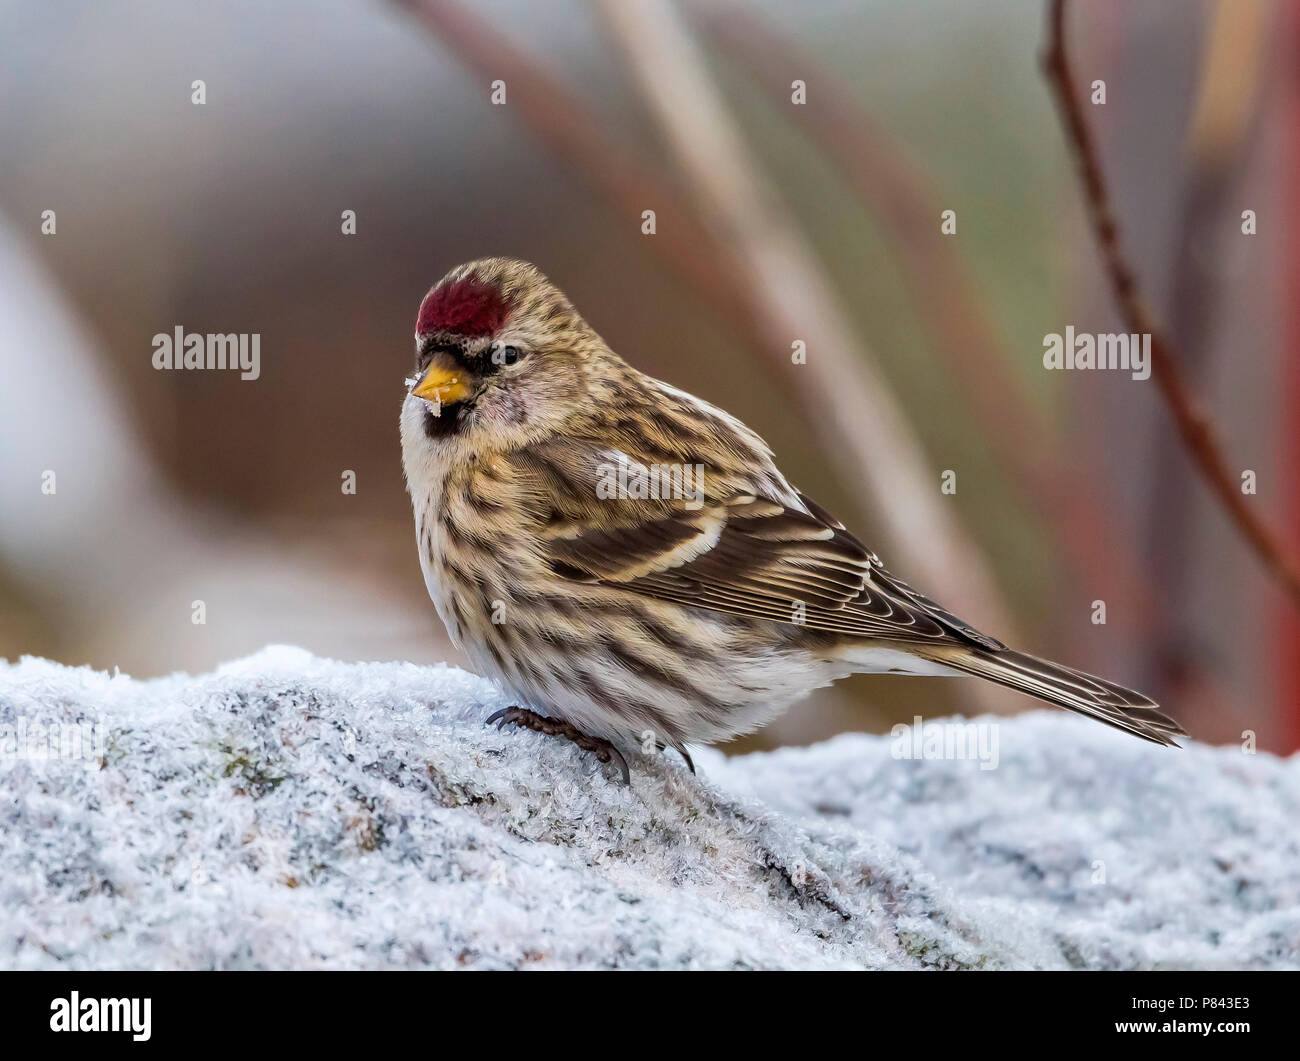 Female Common Redpoll sitting on a rock in Üto Island, Finland. February 2013. Stock Photo